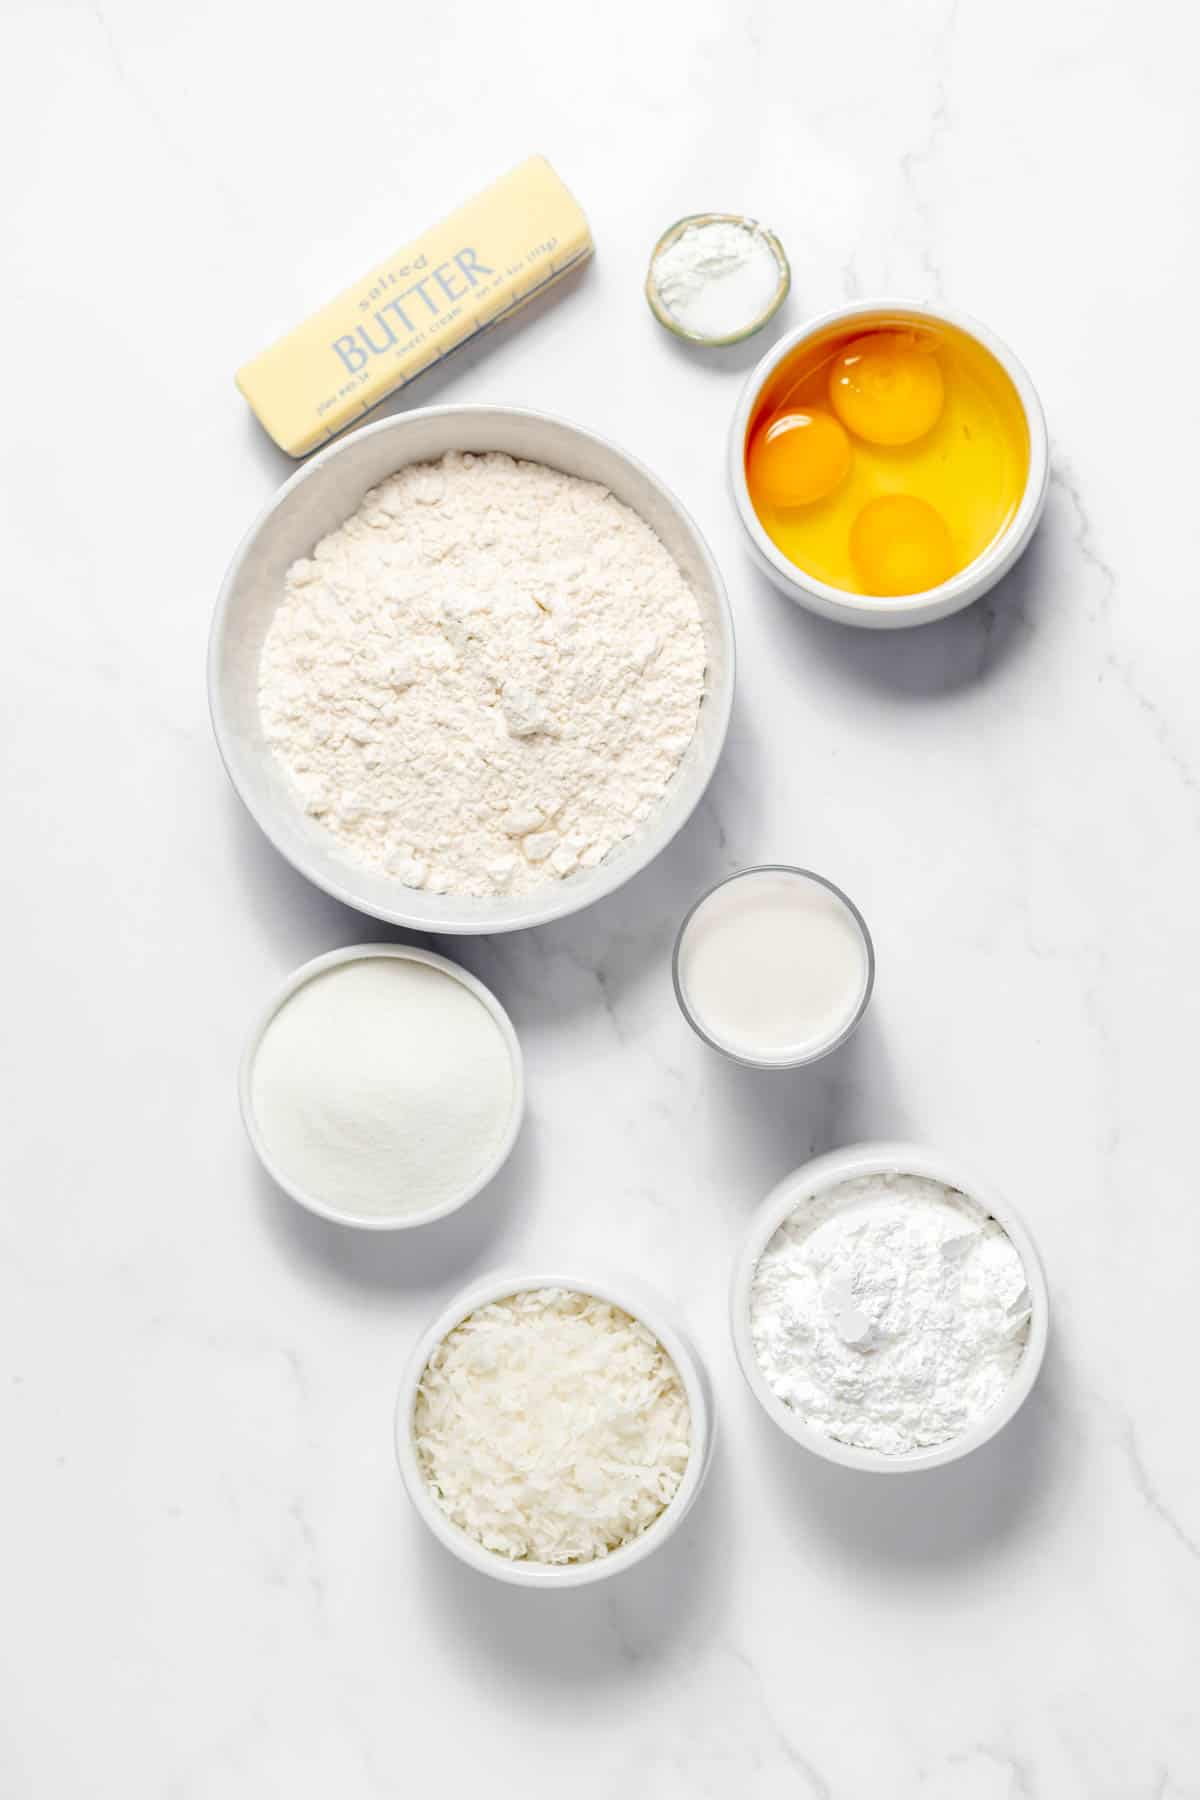 Top view of ingredients needed to make Coconut Bread in small bowls on a white surface. 